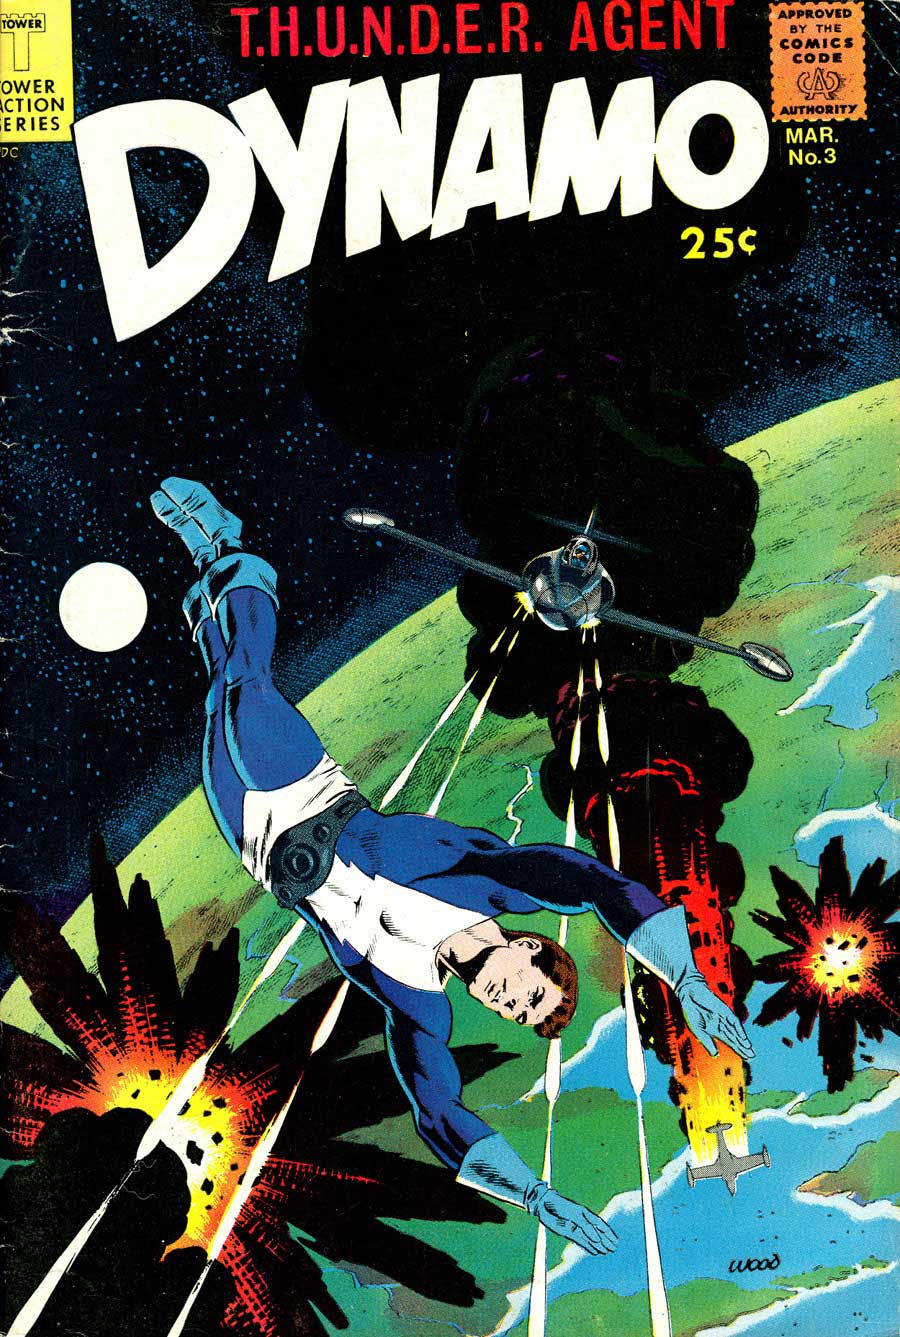 Dynamo v1 #3 tower 1960s silver age comic book cover art by Wally Wood